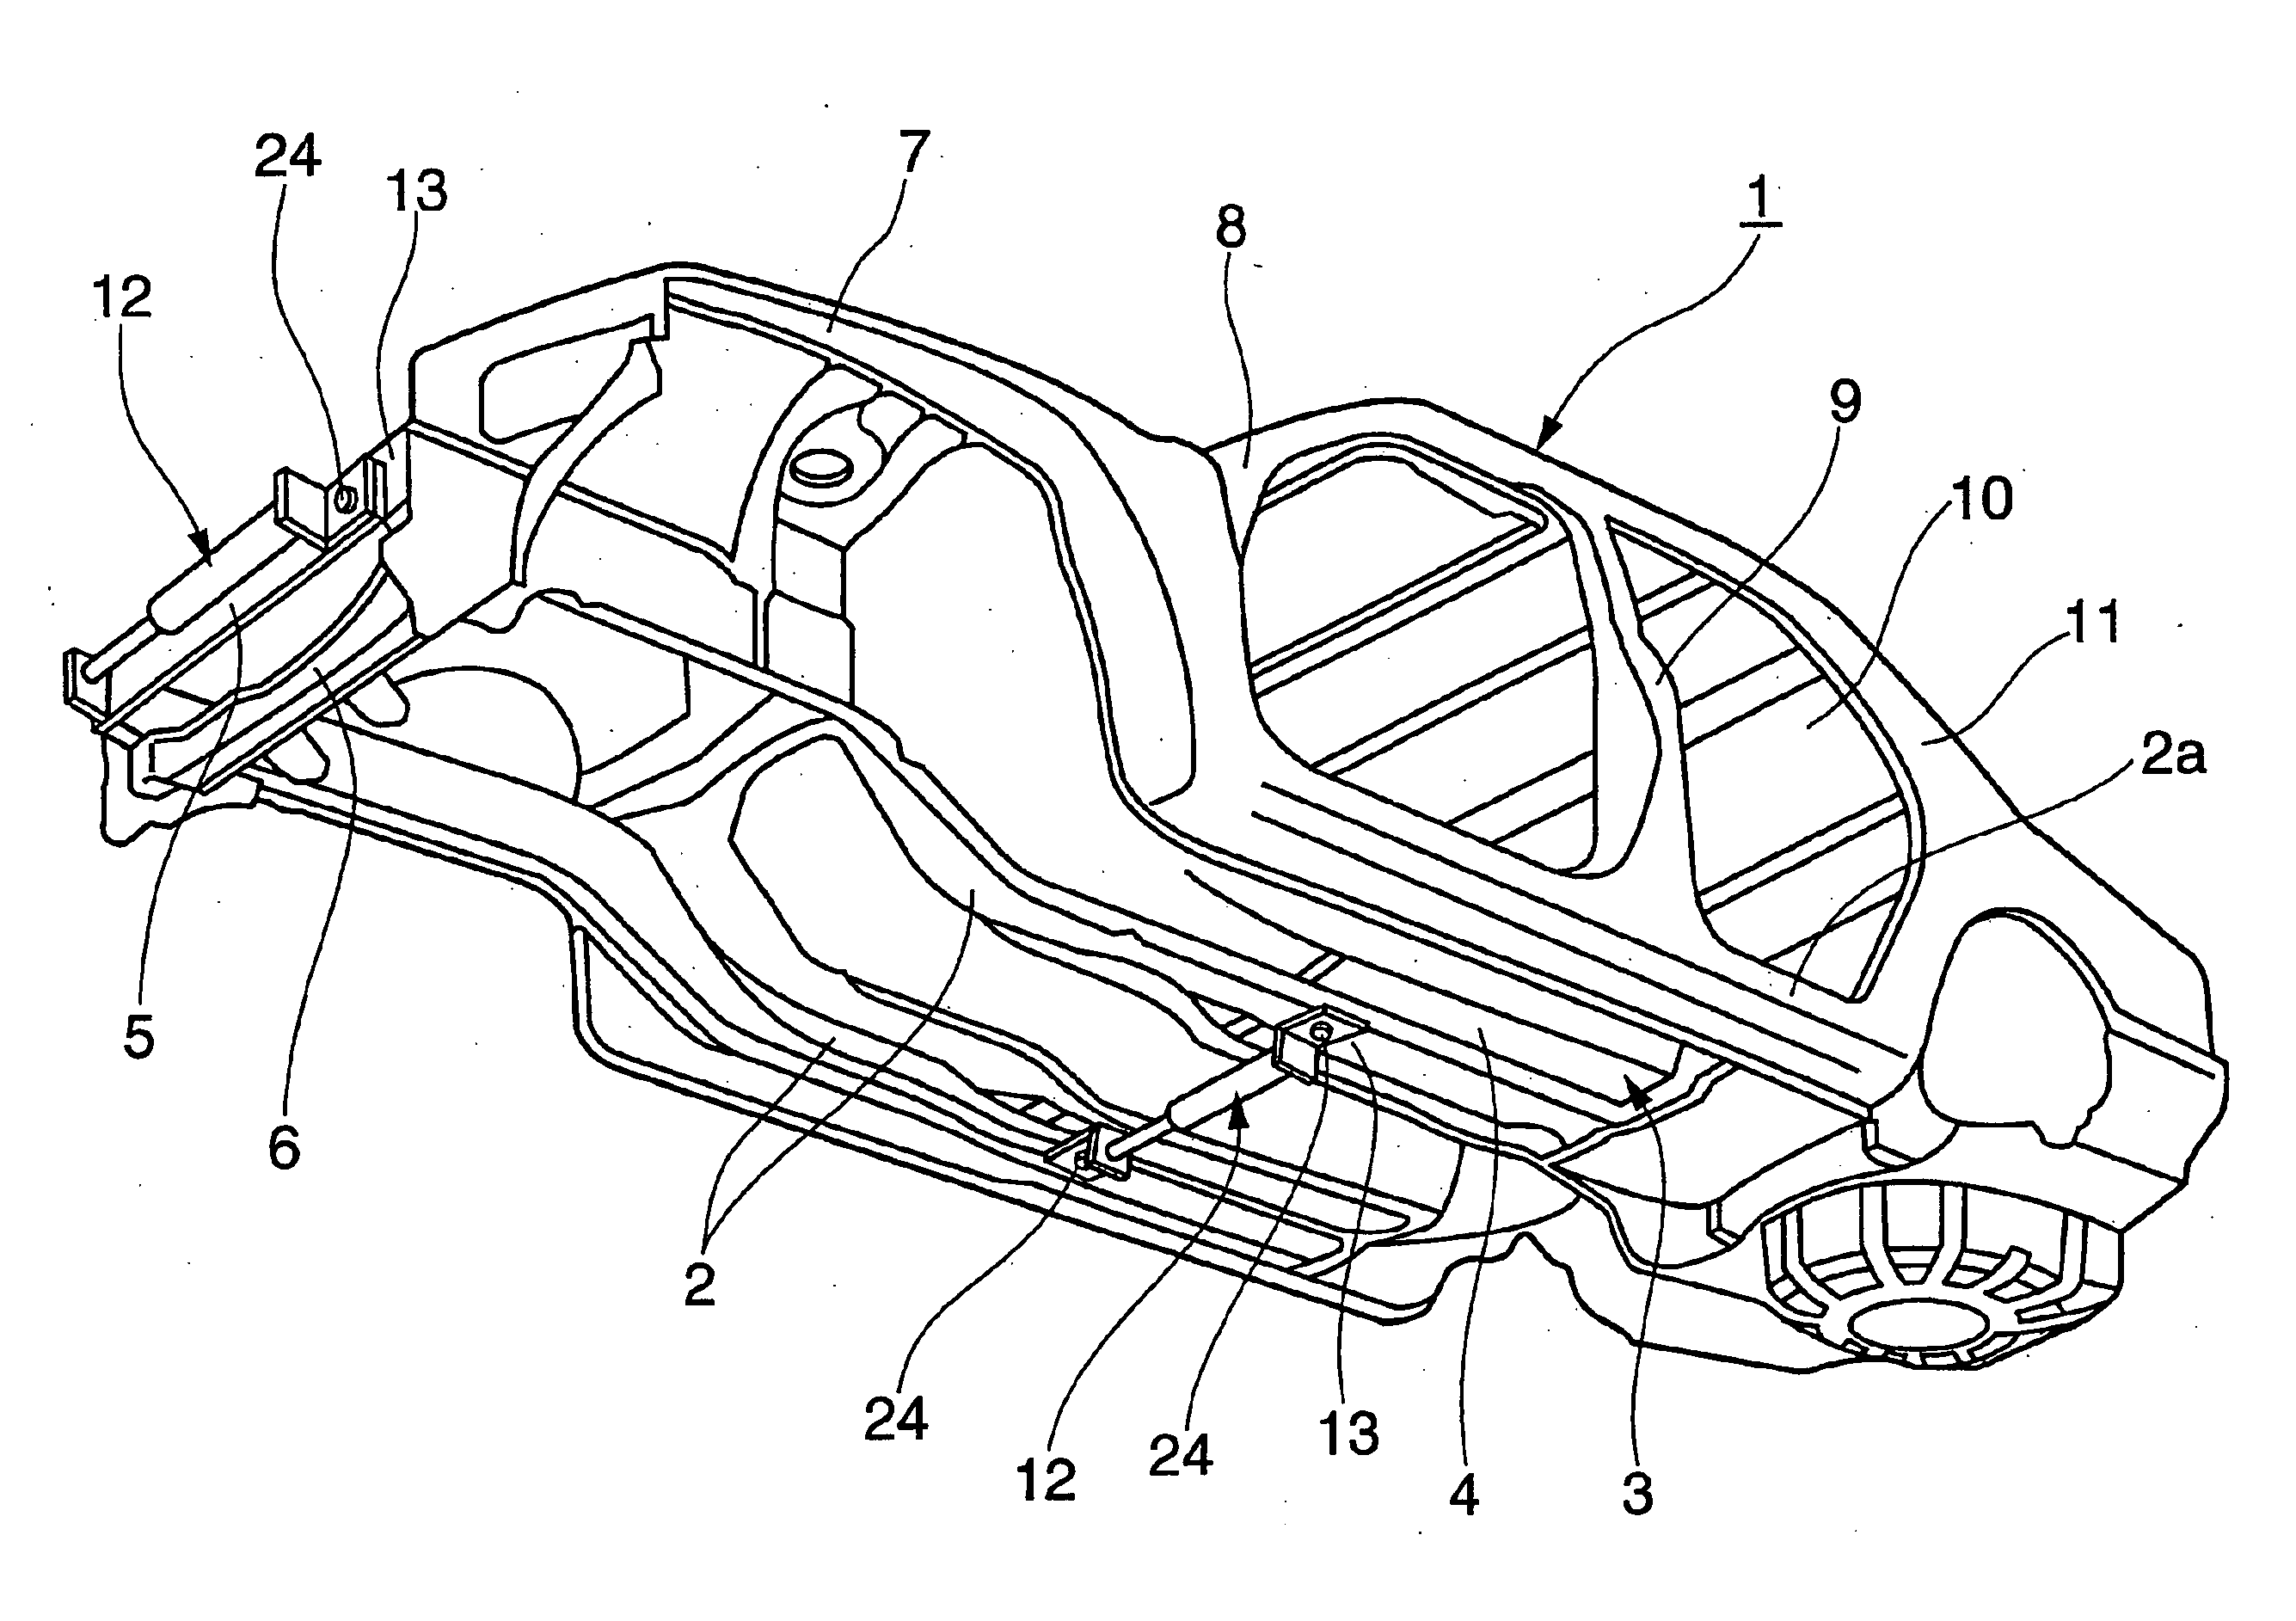 Reinforcement device for vehicle